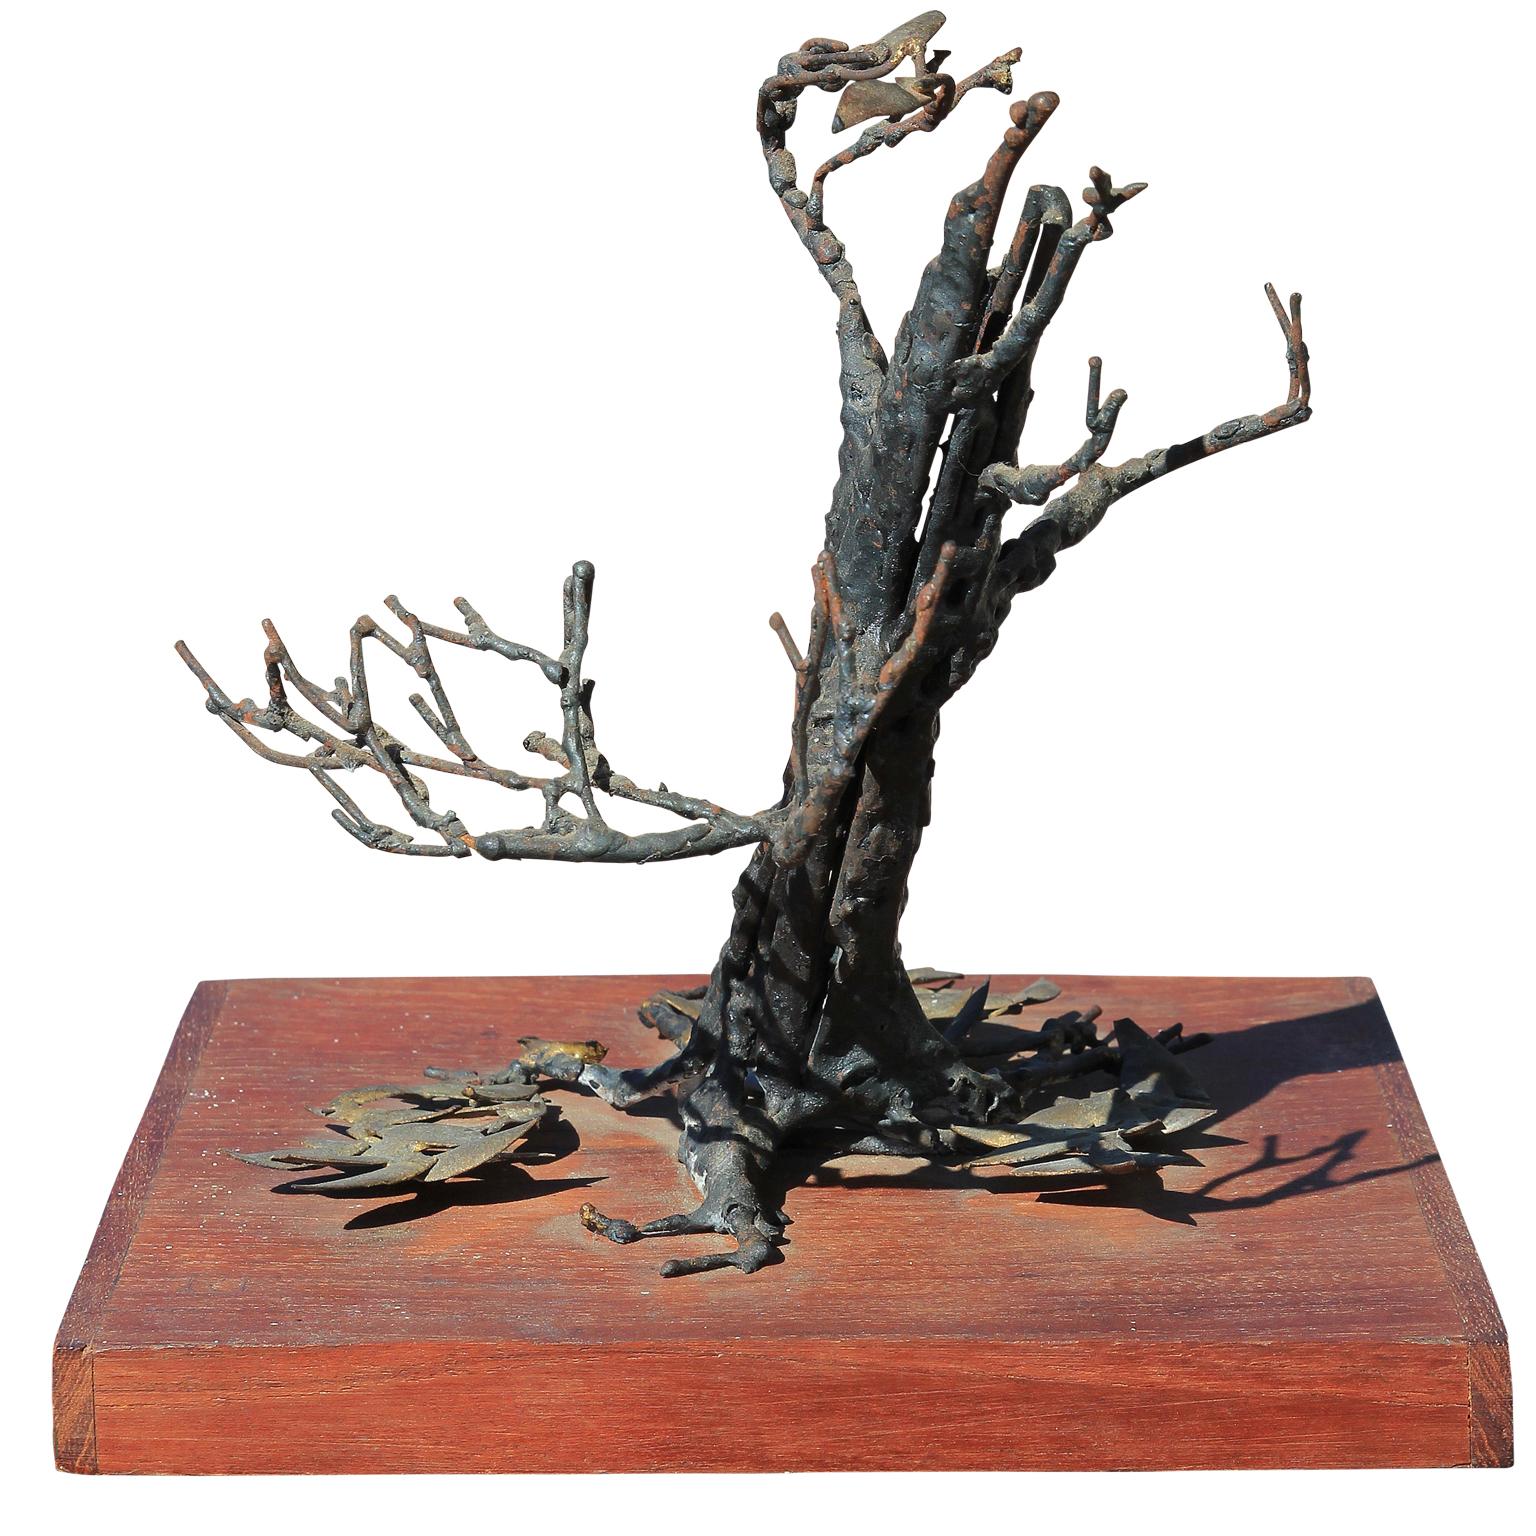 Bob Fowler Still-Life Sculpture - Modern Brutalist Metal Abstract Withered Tree Sculpture on a Wooden Base